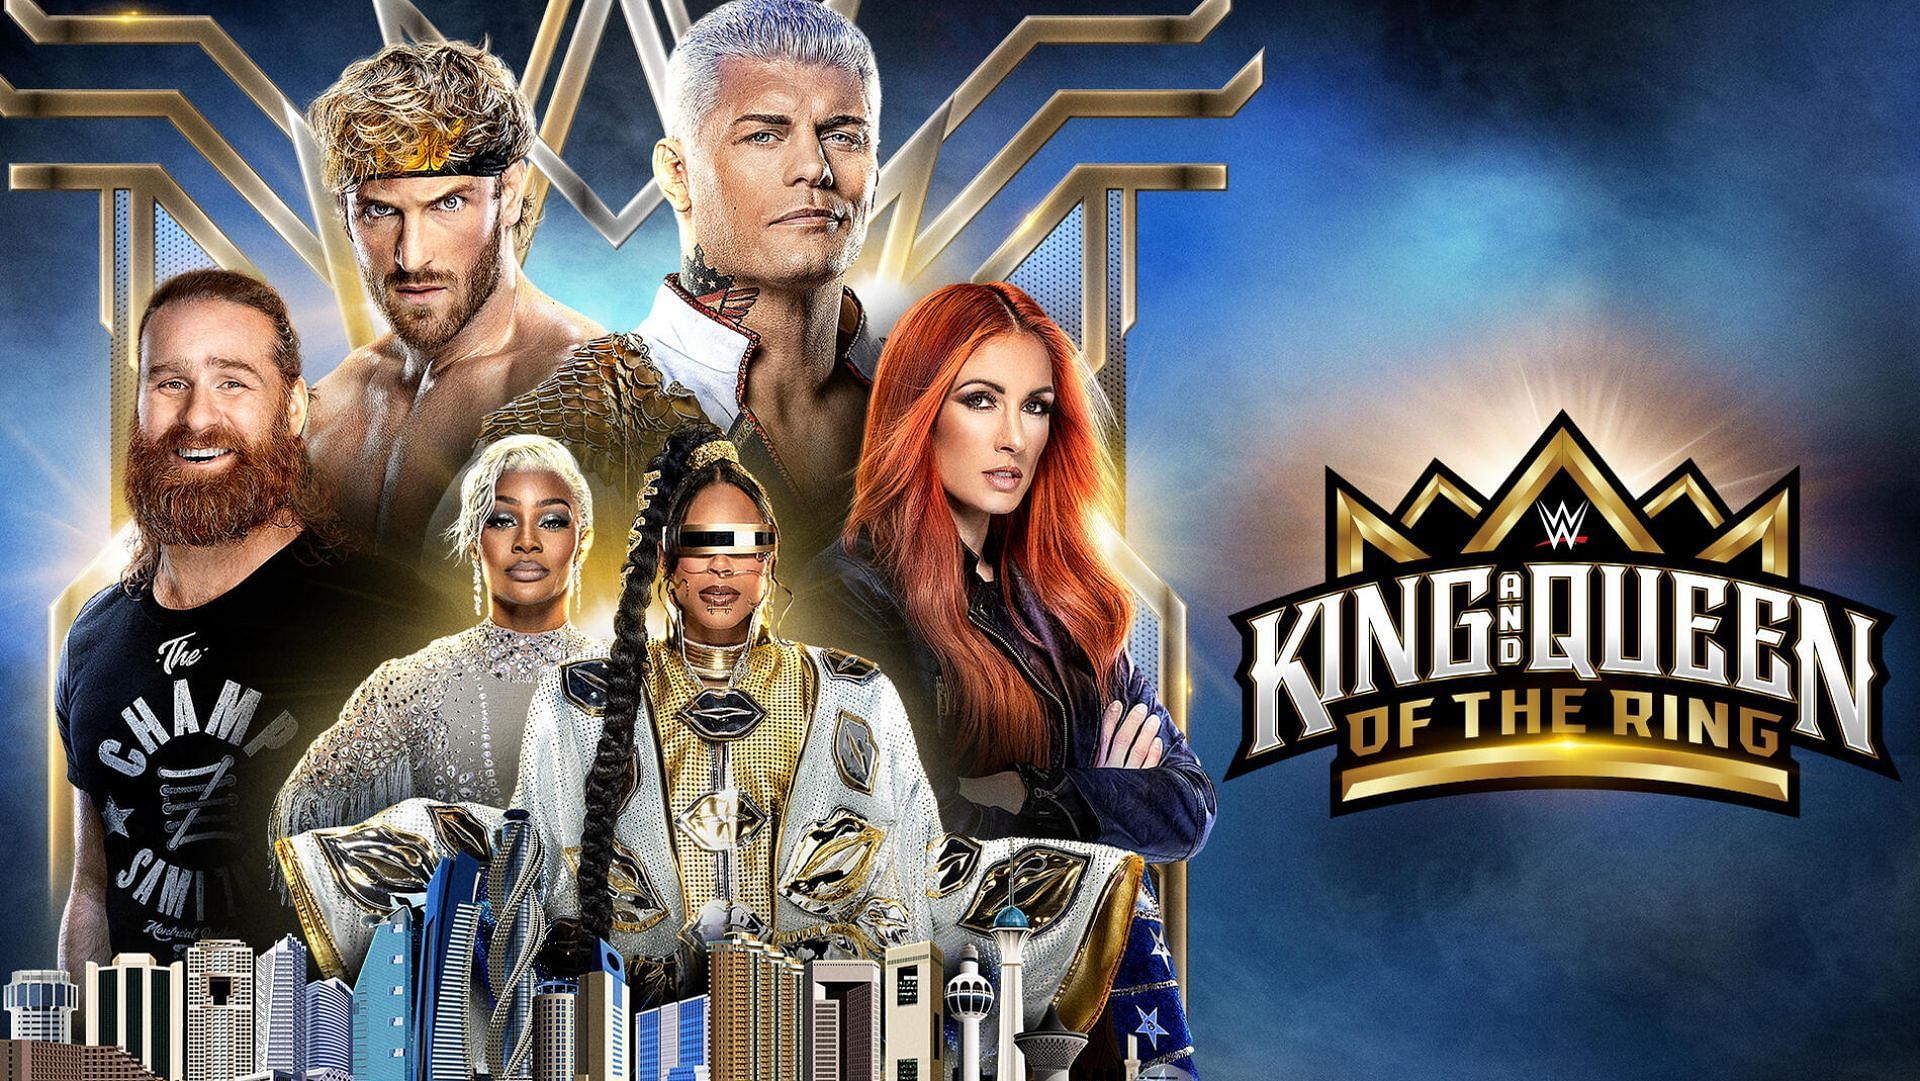 King and Queen of the Ring is scheduled at Saudi Arabia.